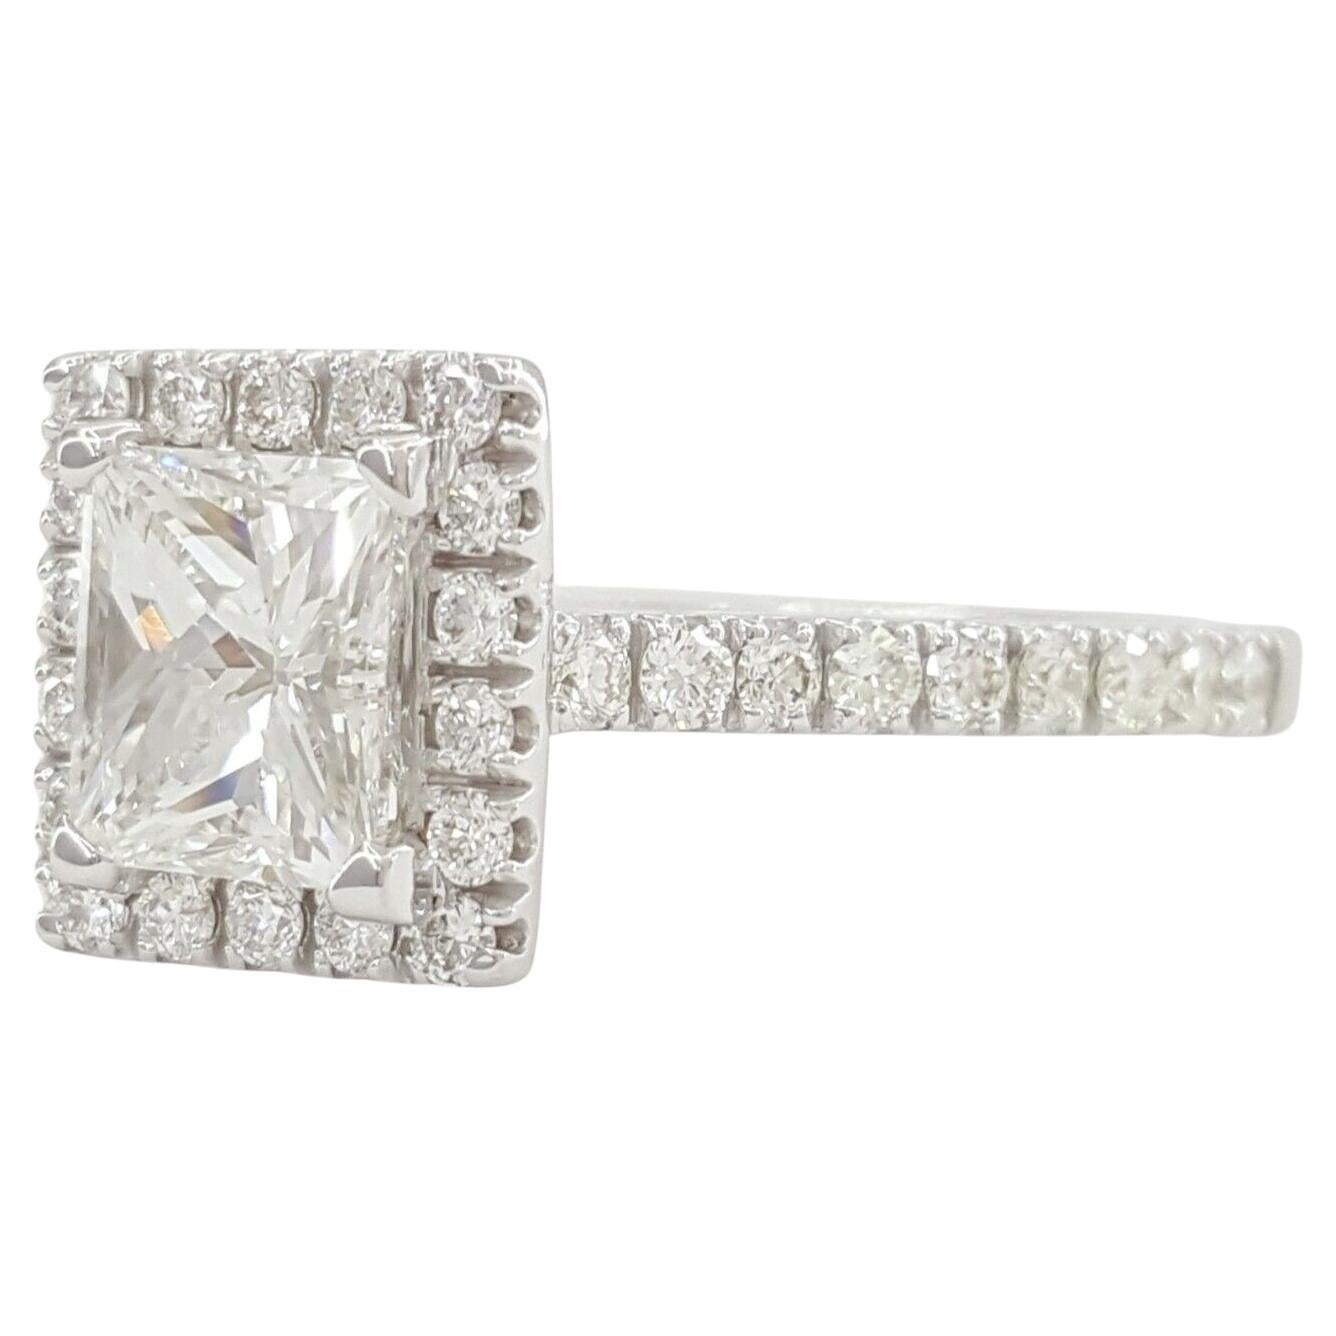 Princess Cut Diamond Halo Engagement Ring with GIA Report.  


